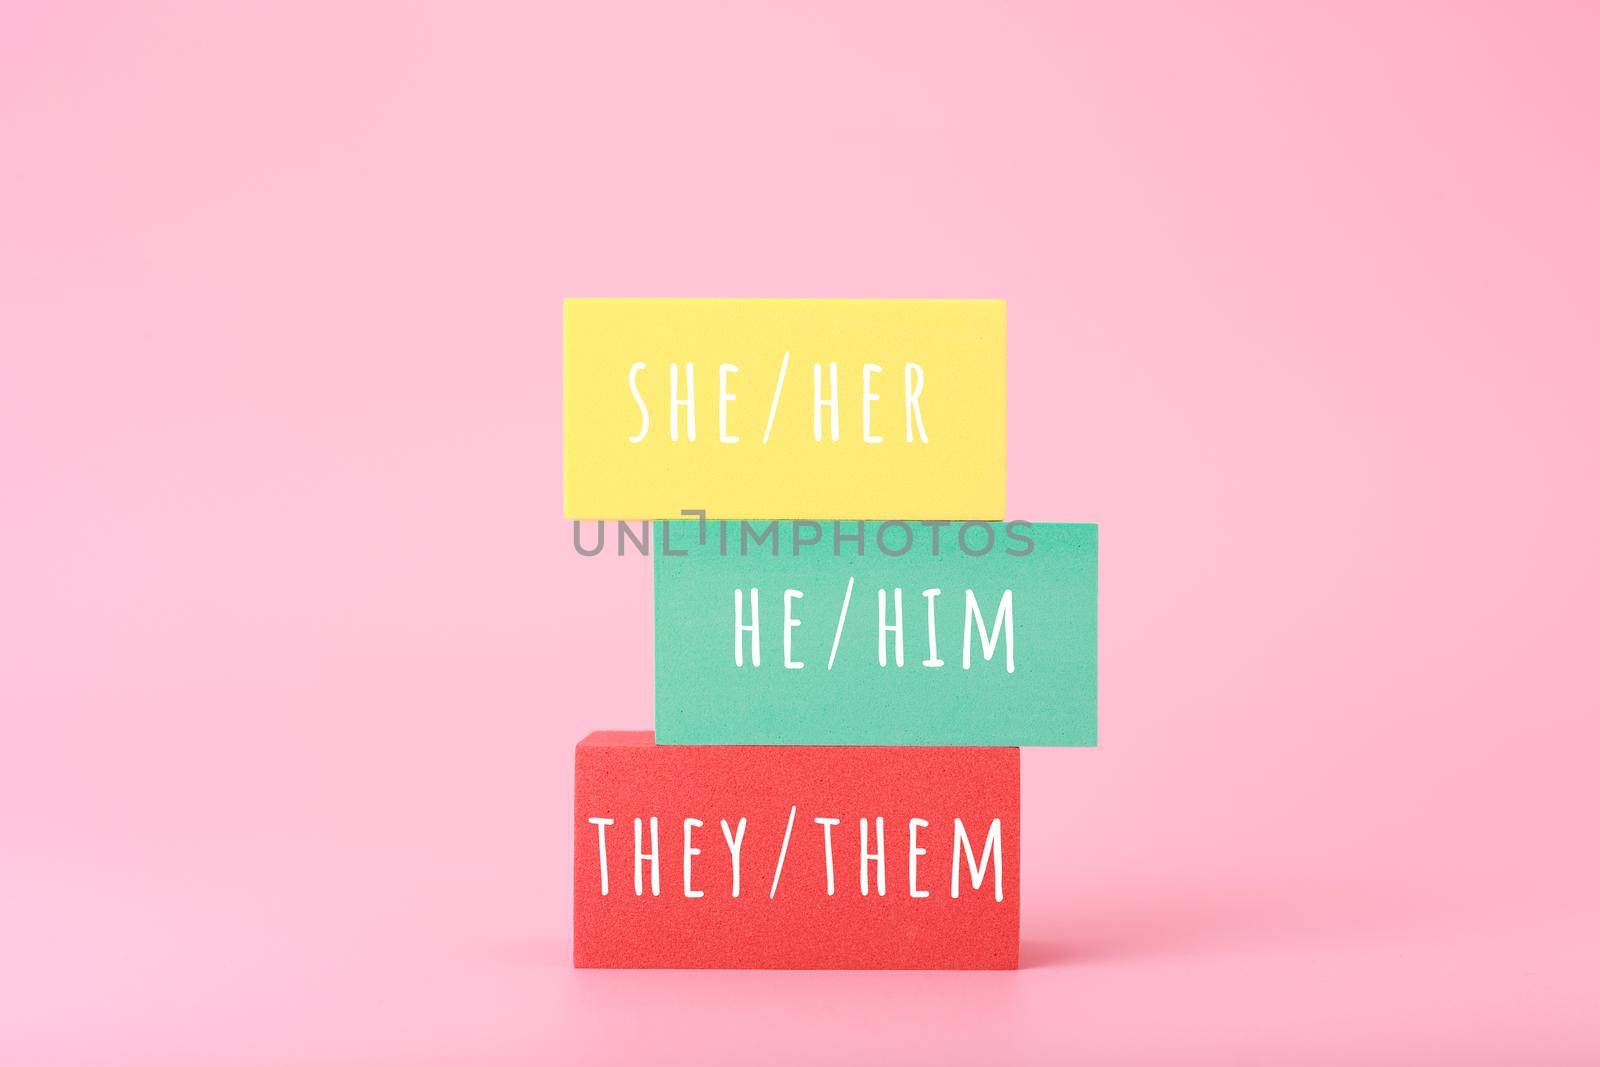 Correct pronouns for different genders hand written on multicolored rectangles against bright pink background by Senorina_Irina